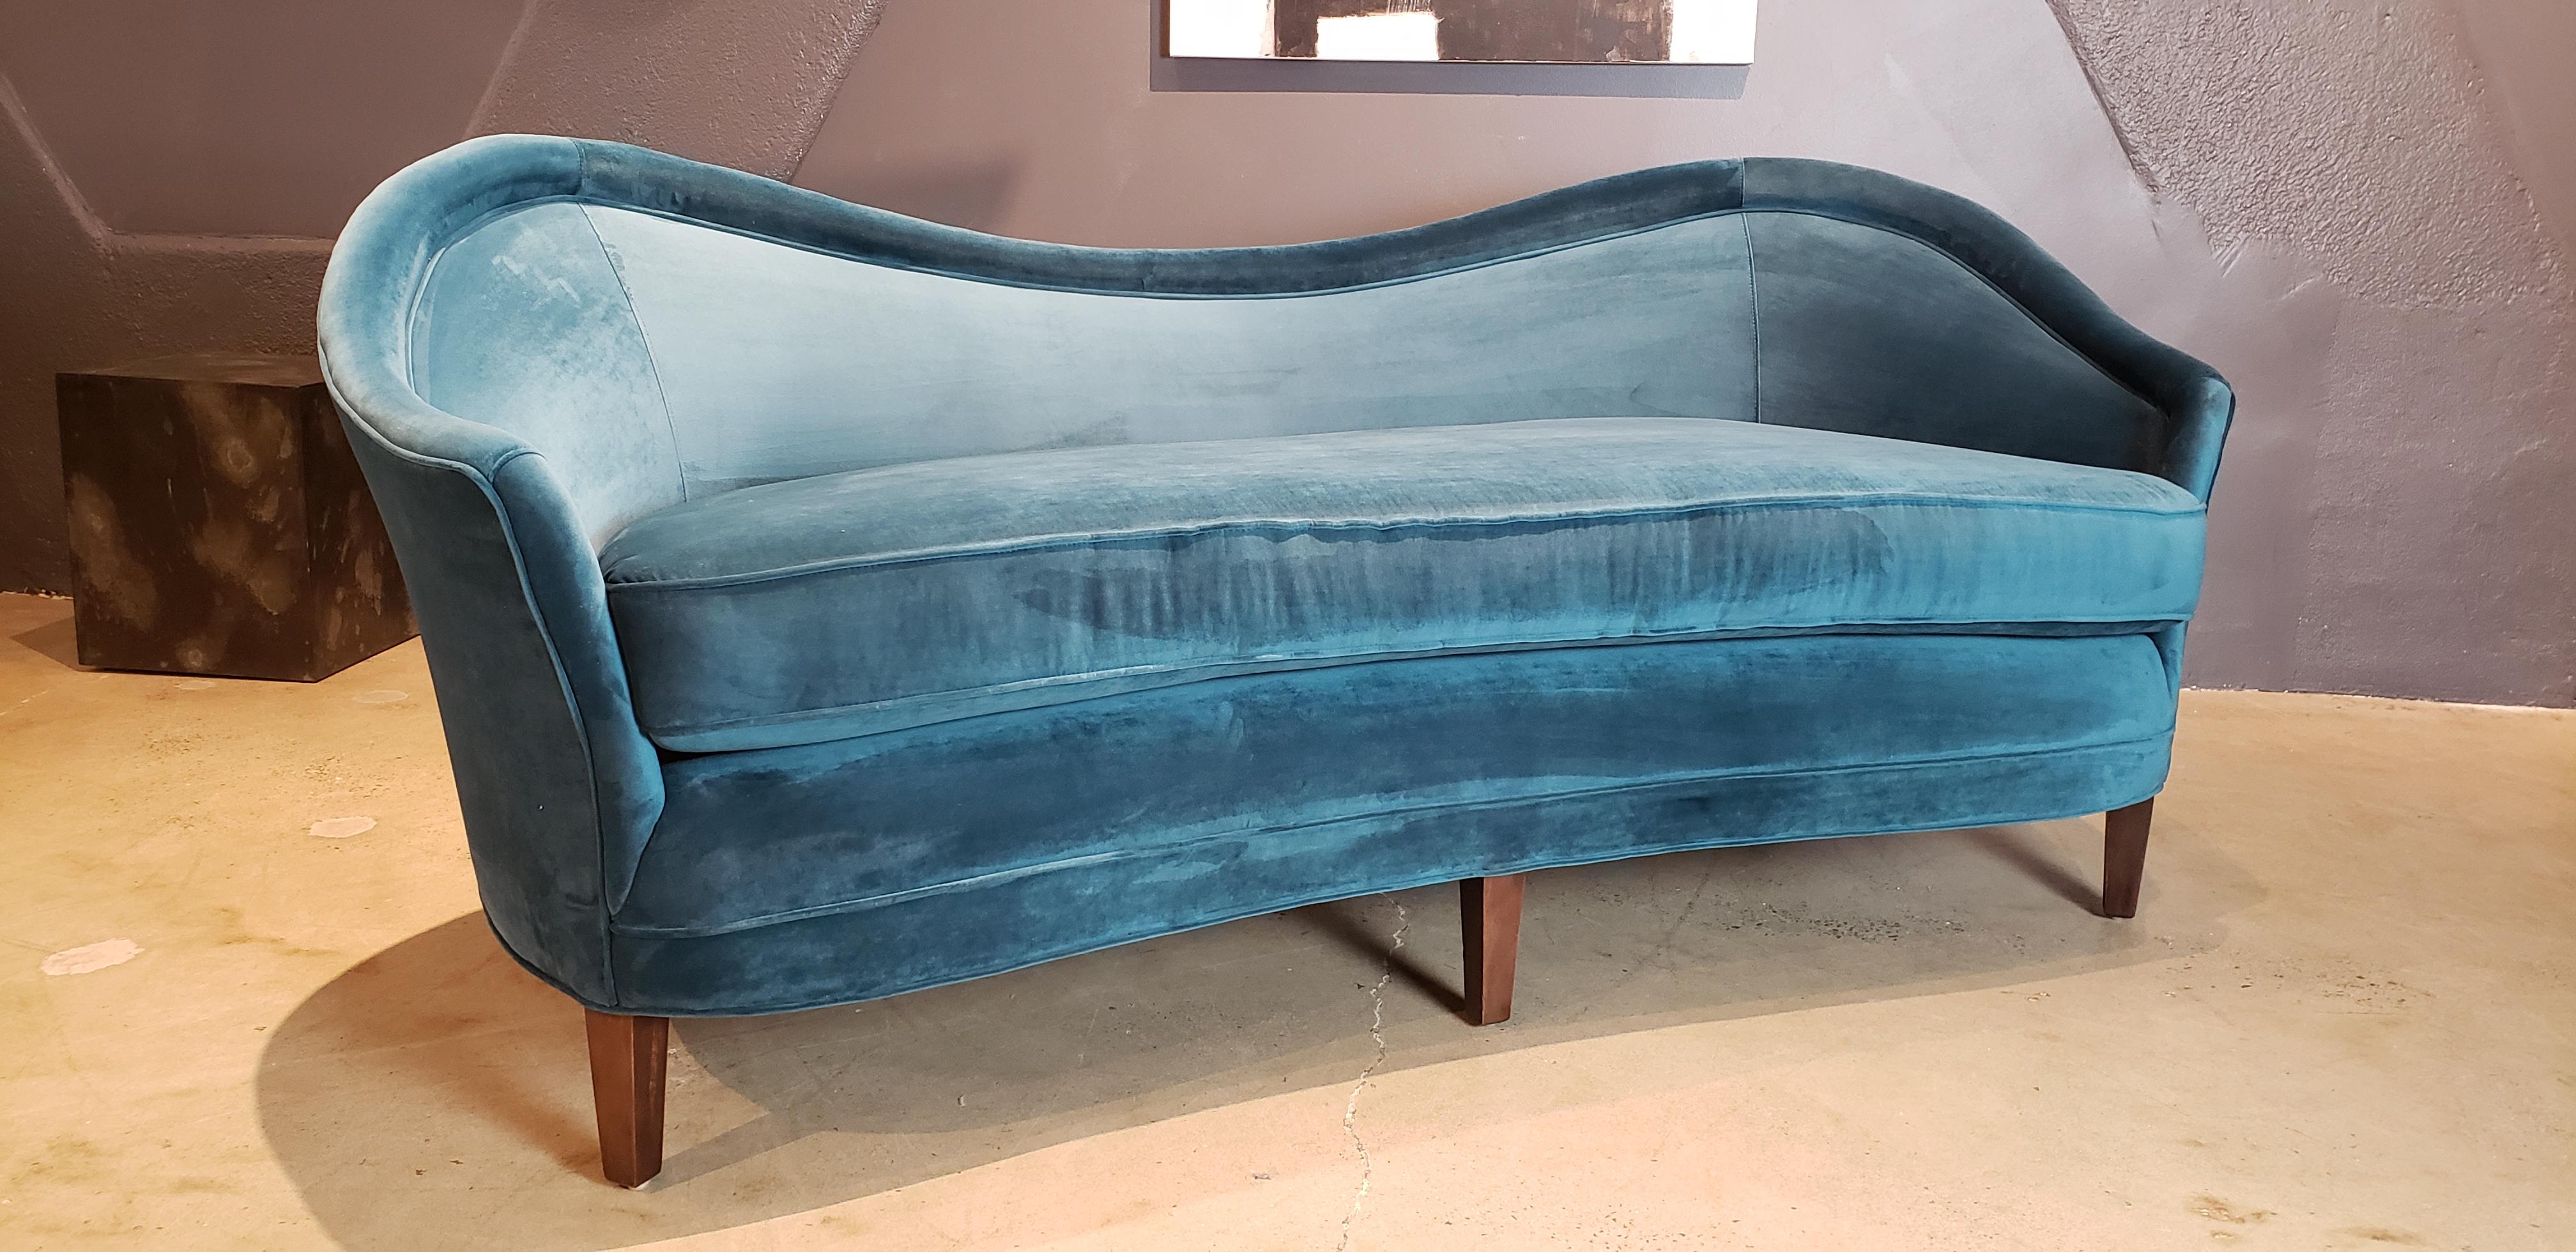 Elegant early midcentury Italian curved sofa in the style of Gio Ponti's work for Casa e Giardino. Quite possibly Ponti, as the shapes look correct, but we cannot be certain enough to do anything other than attribute the design to him. (For